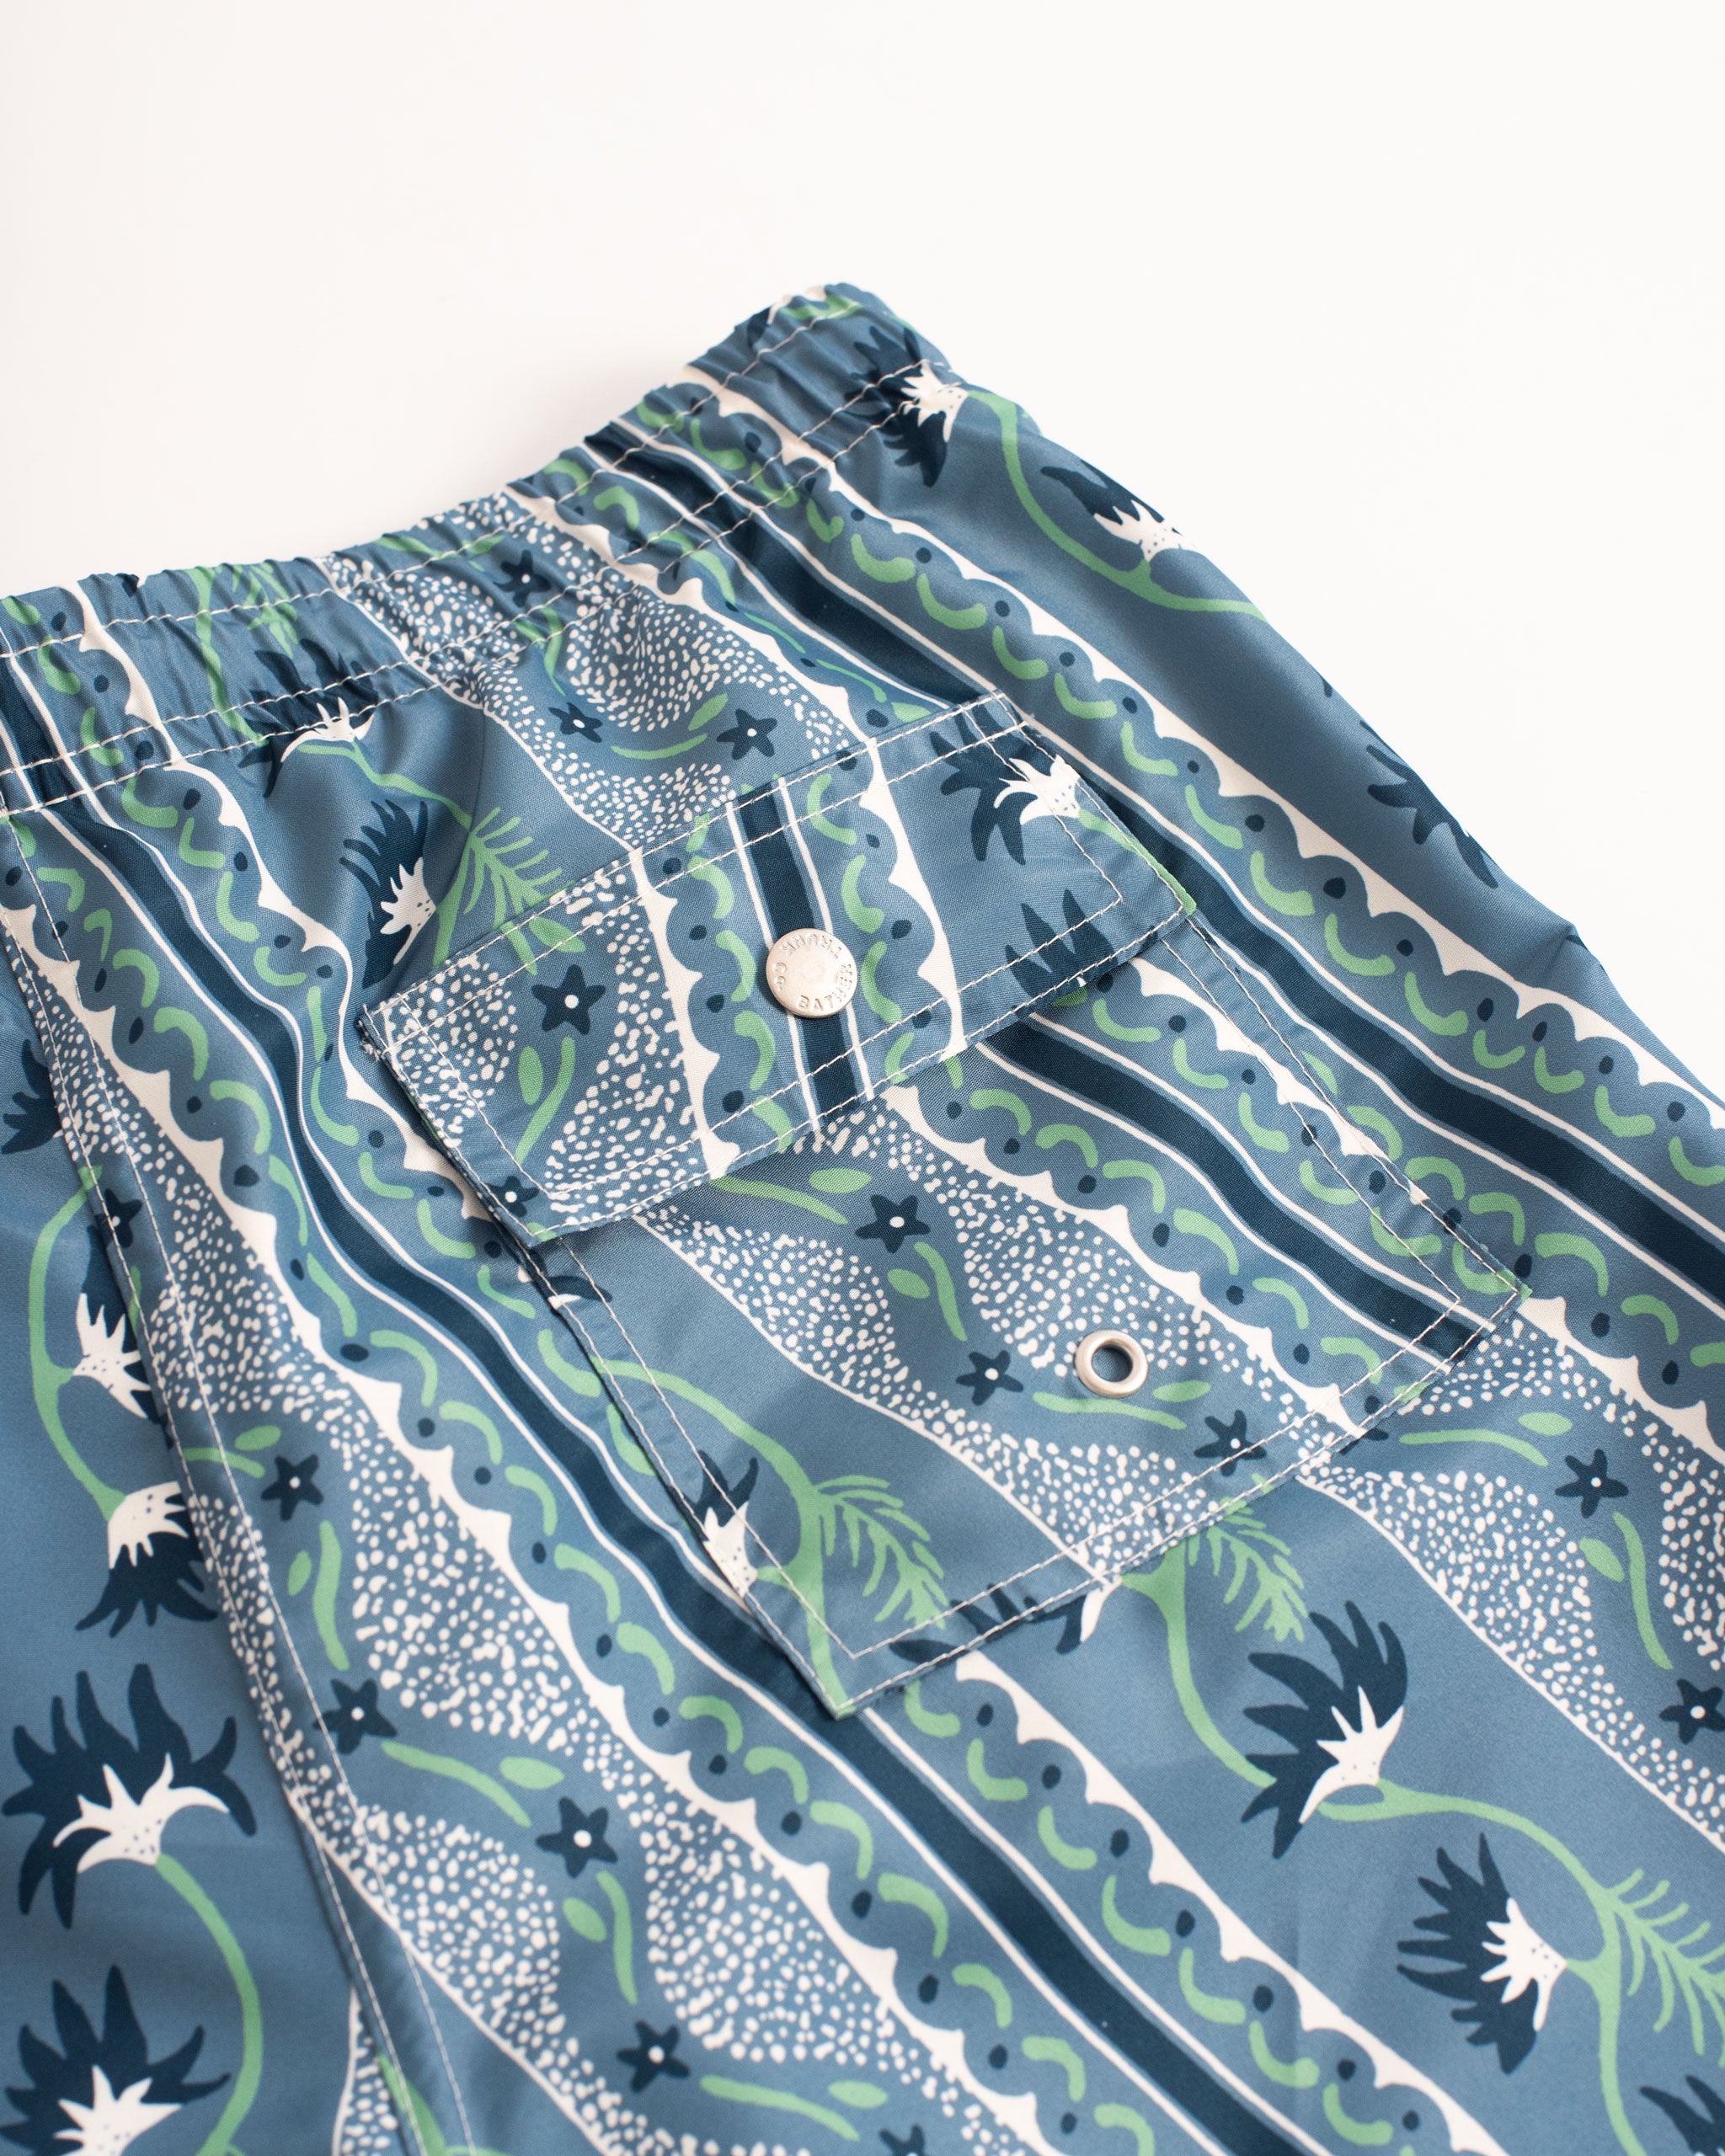 back pocket close up of Blue swim trunk with classic stripe features intricate mosaics of flowers, sand, and starfish